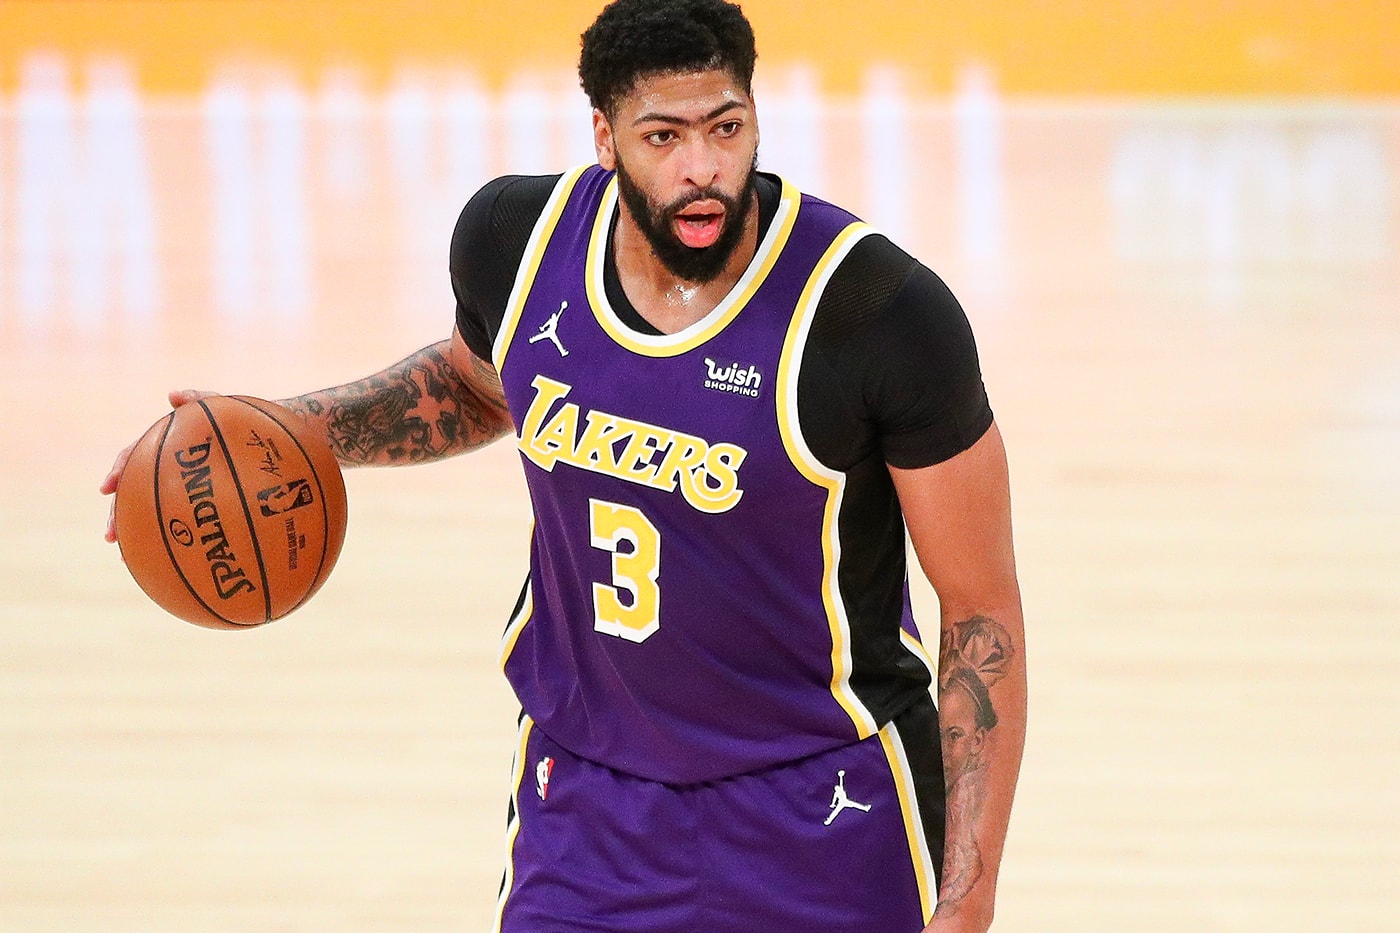 nba Anthony Davis Sit Out Until March 2021 Achilles Aggravation injury national basketball association all star weekend game lebron james los angeles lakers champions championship